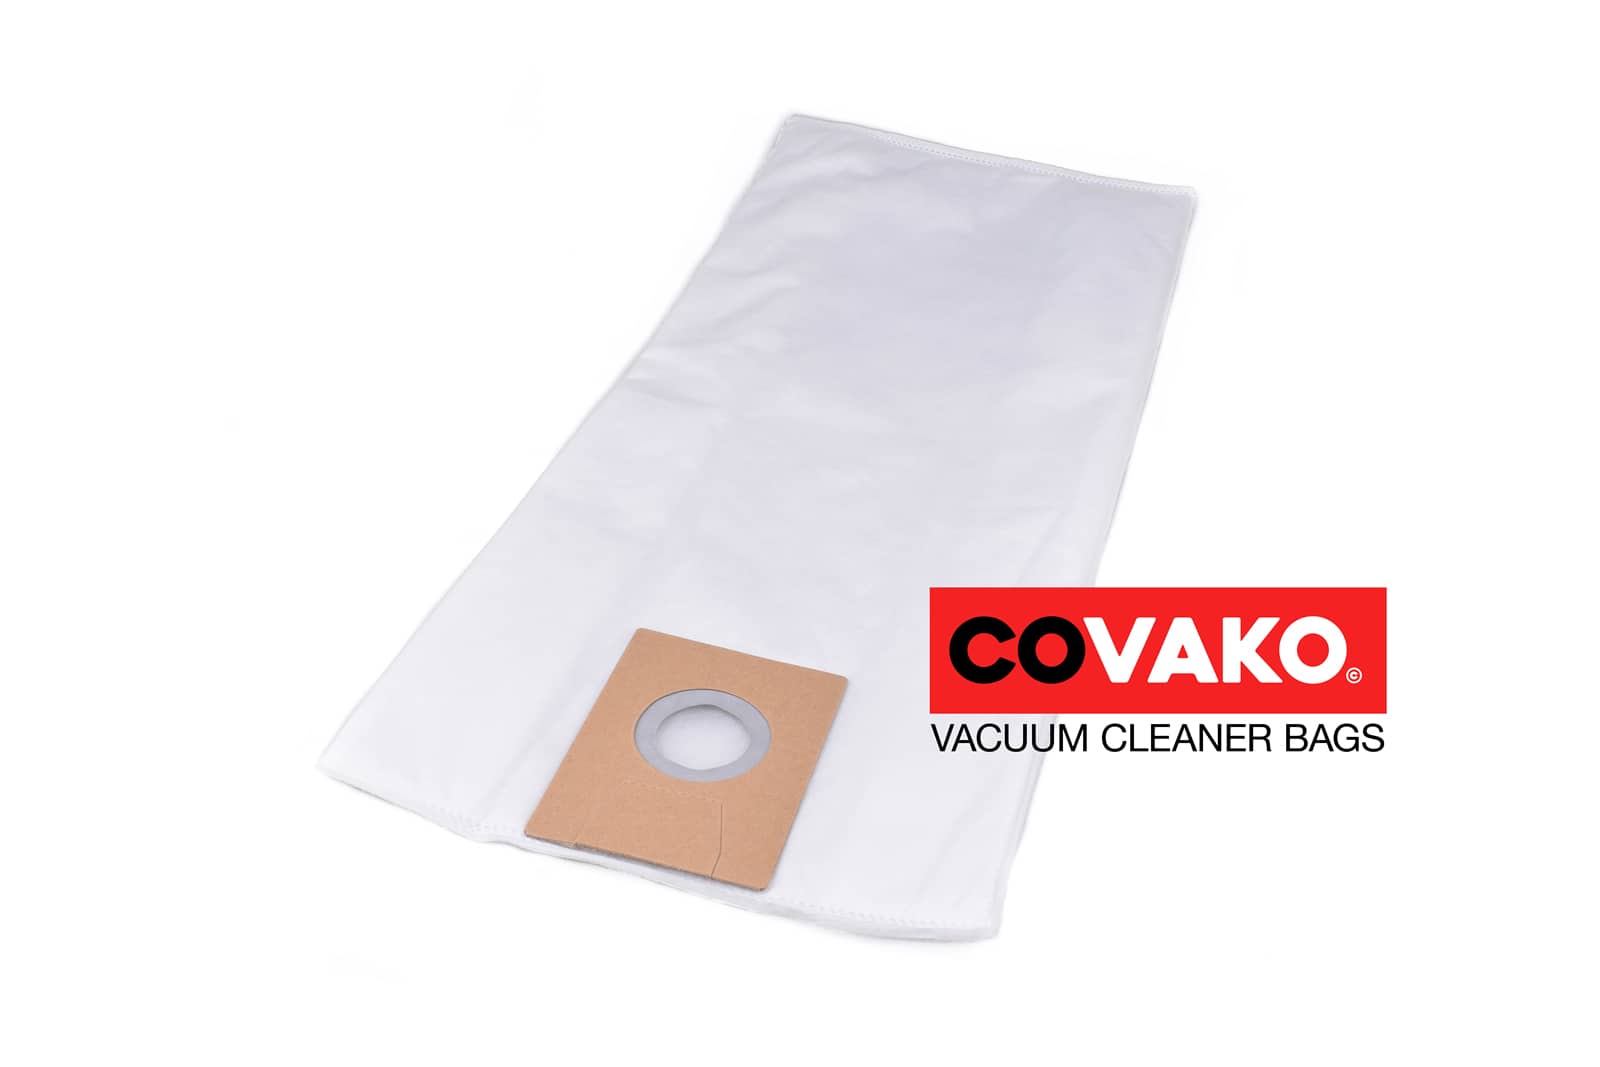 Lavor Windy 365 IR / Synthesis - Lavor vacuum cleaner bags